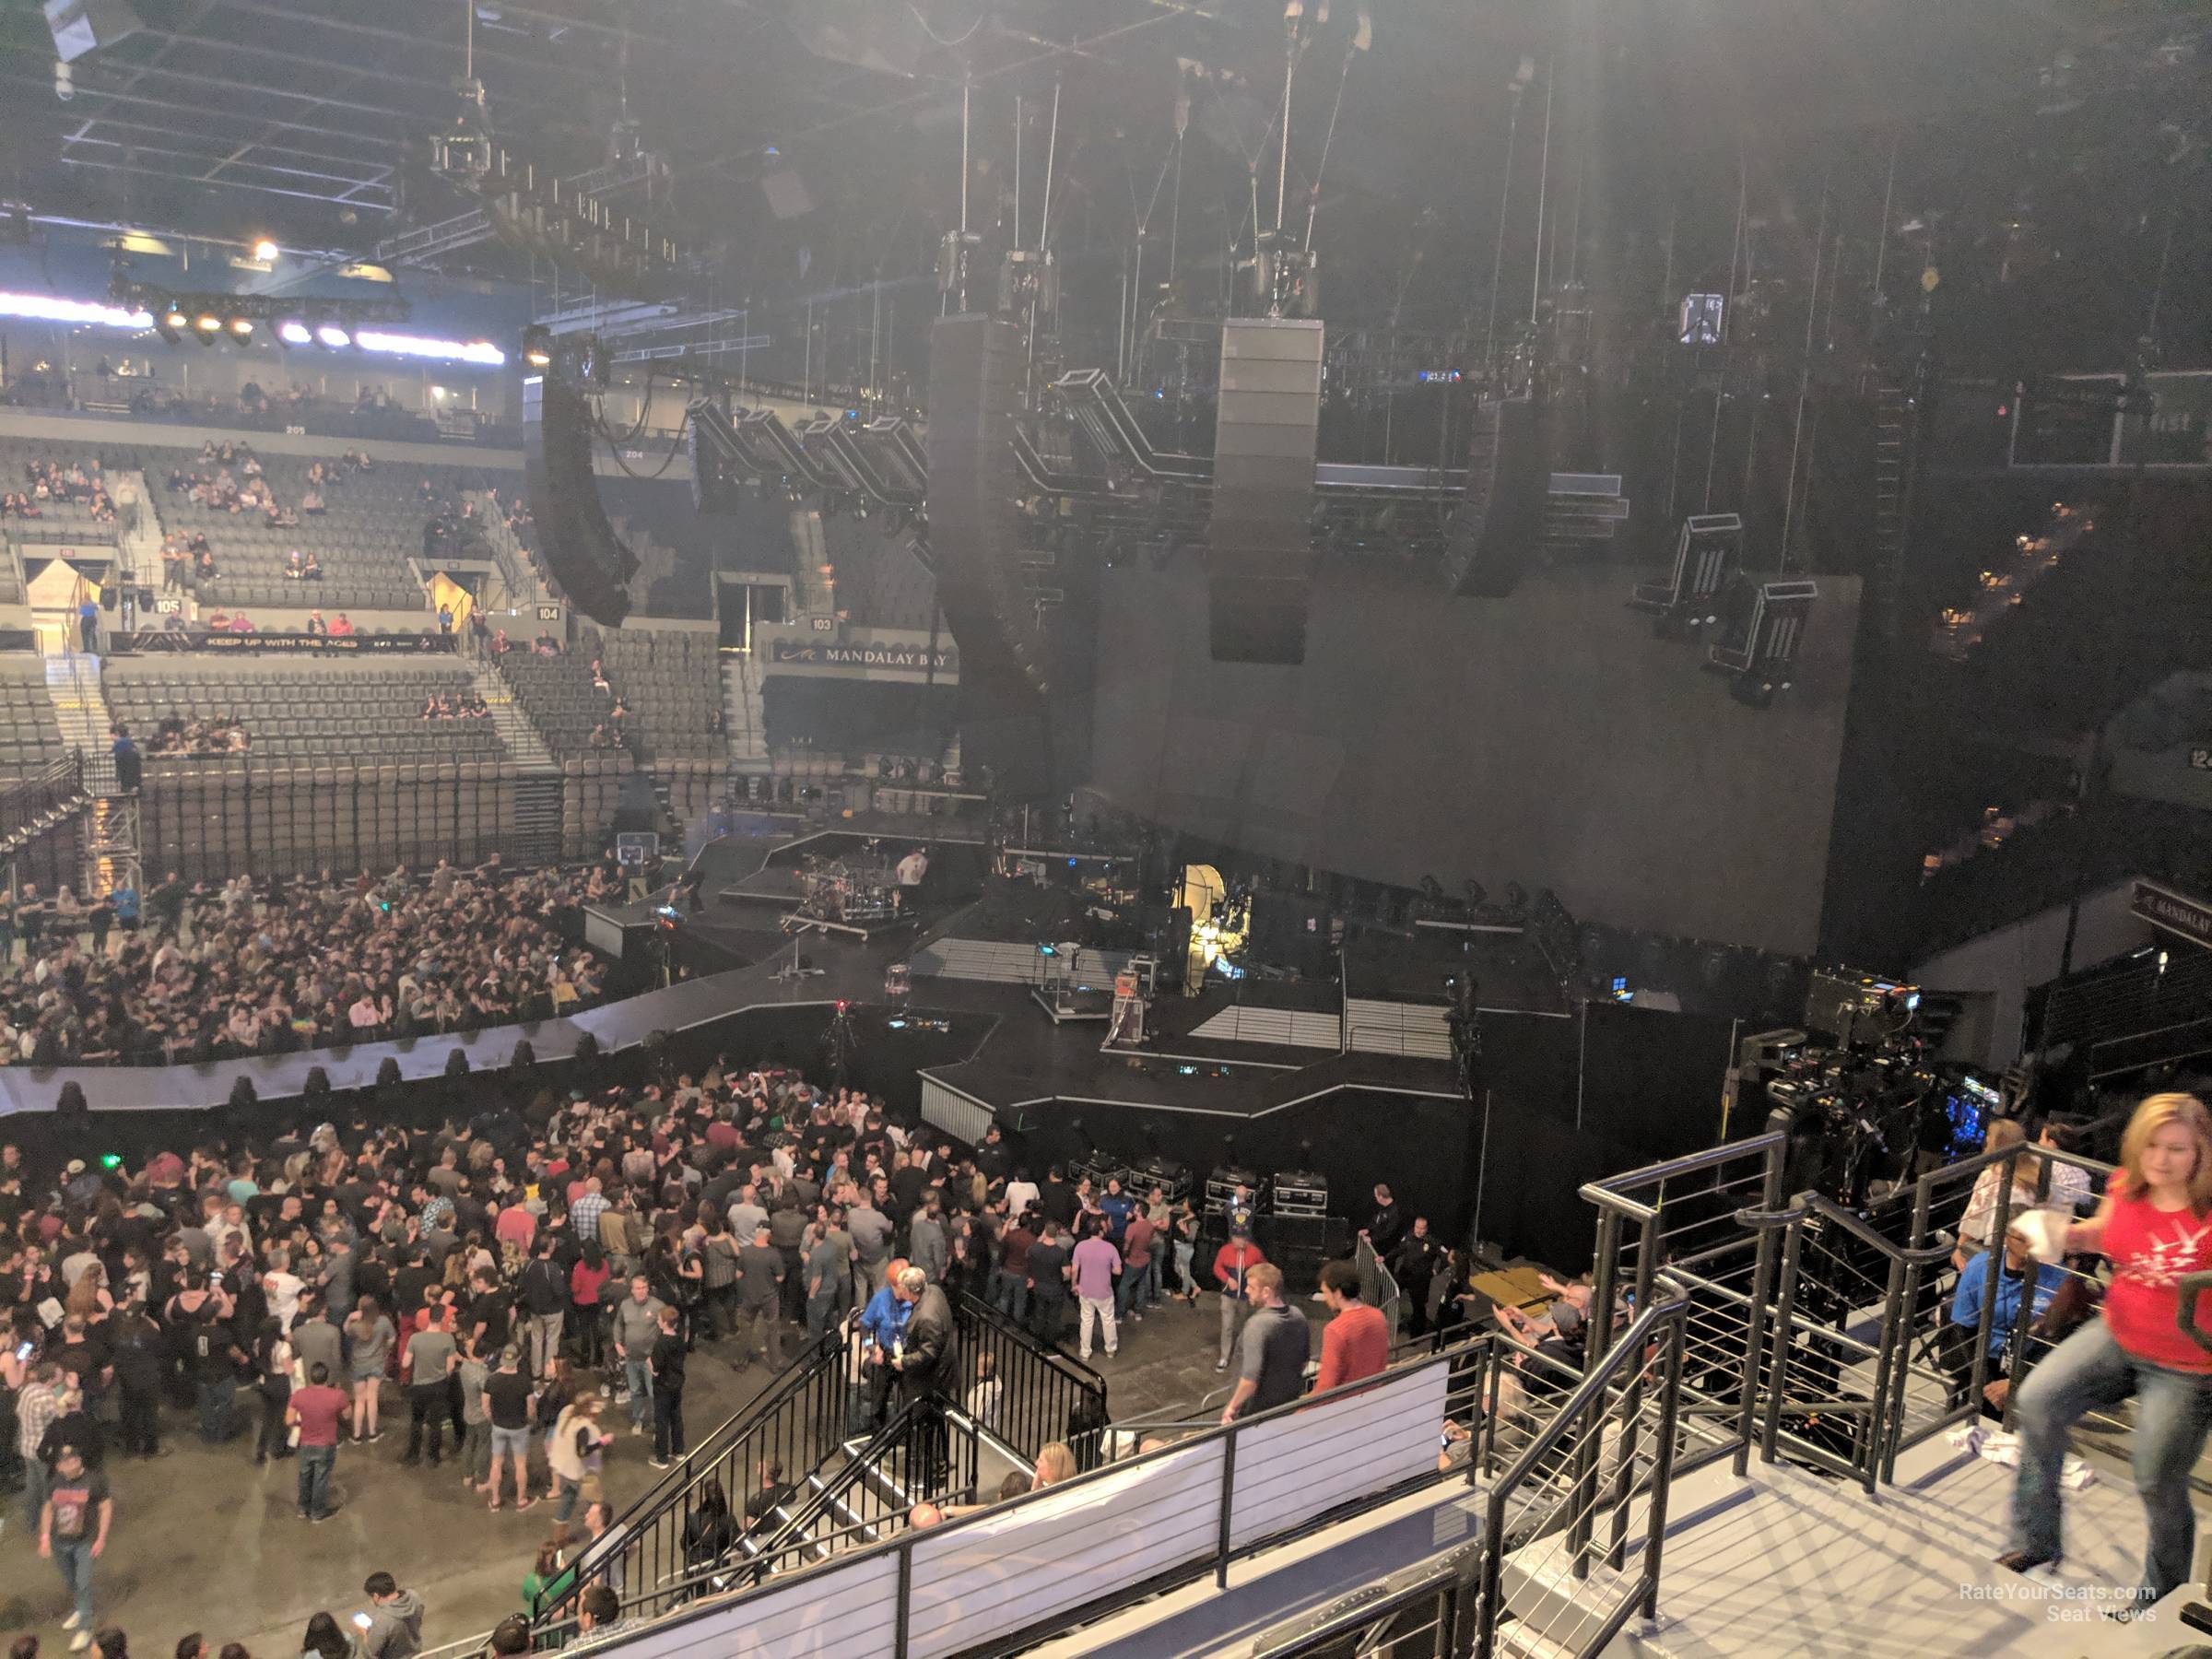 Section 220 at Michelob ULTRA Arena